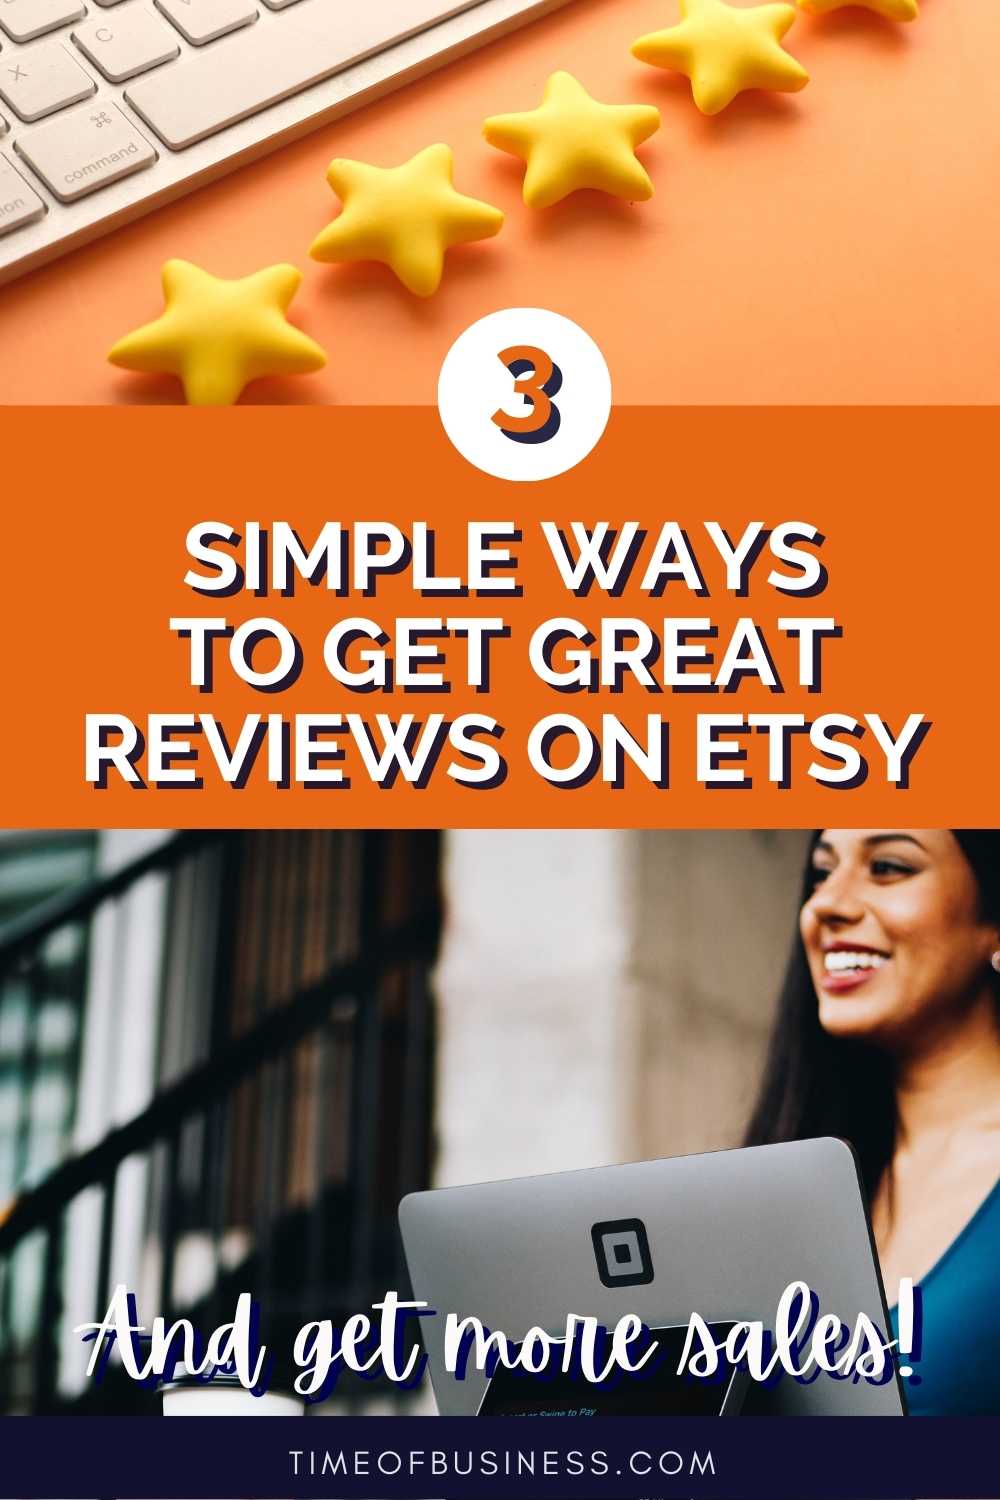 3 Simple ways to get great reviews on Etsy